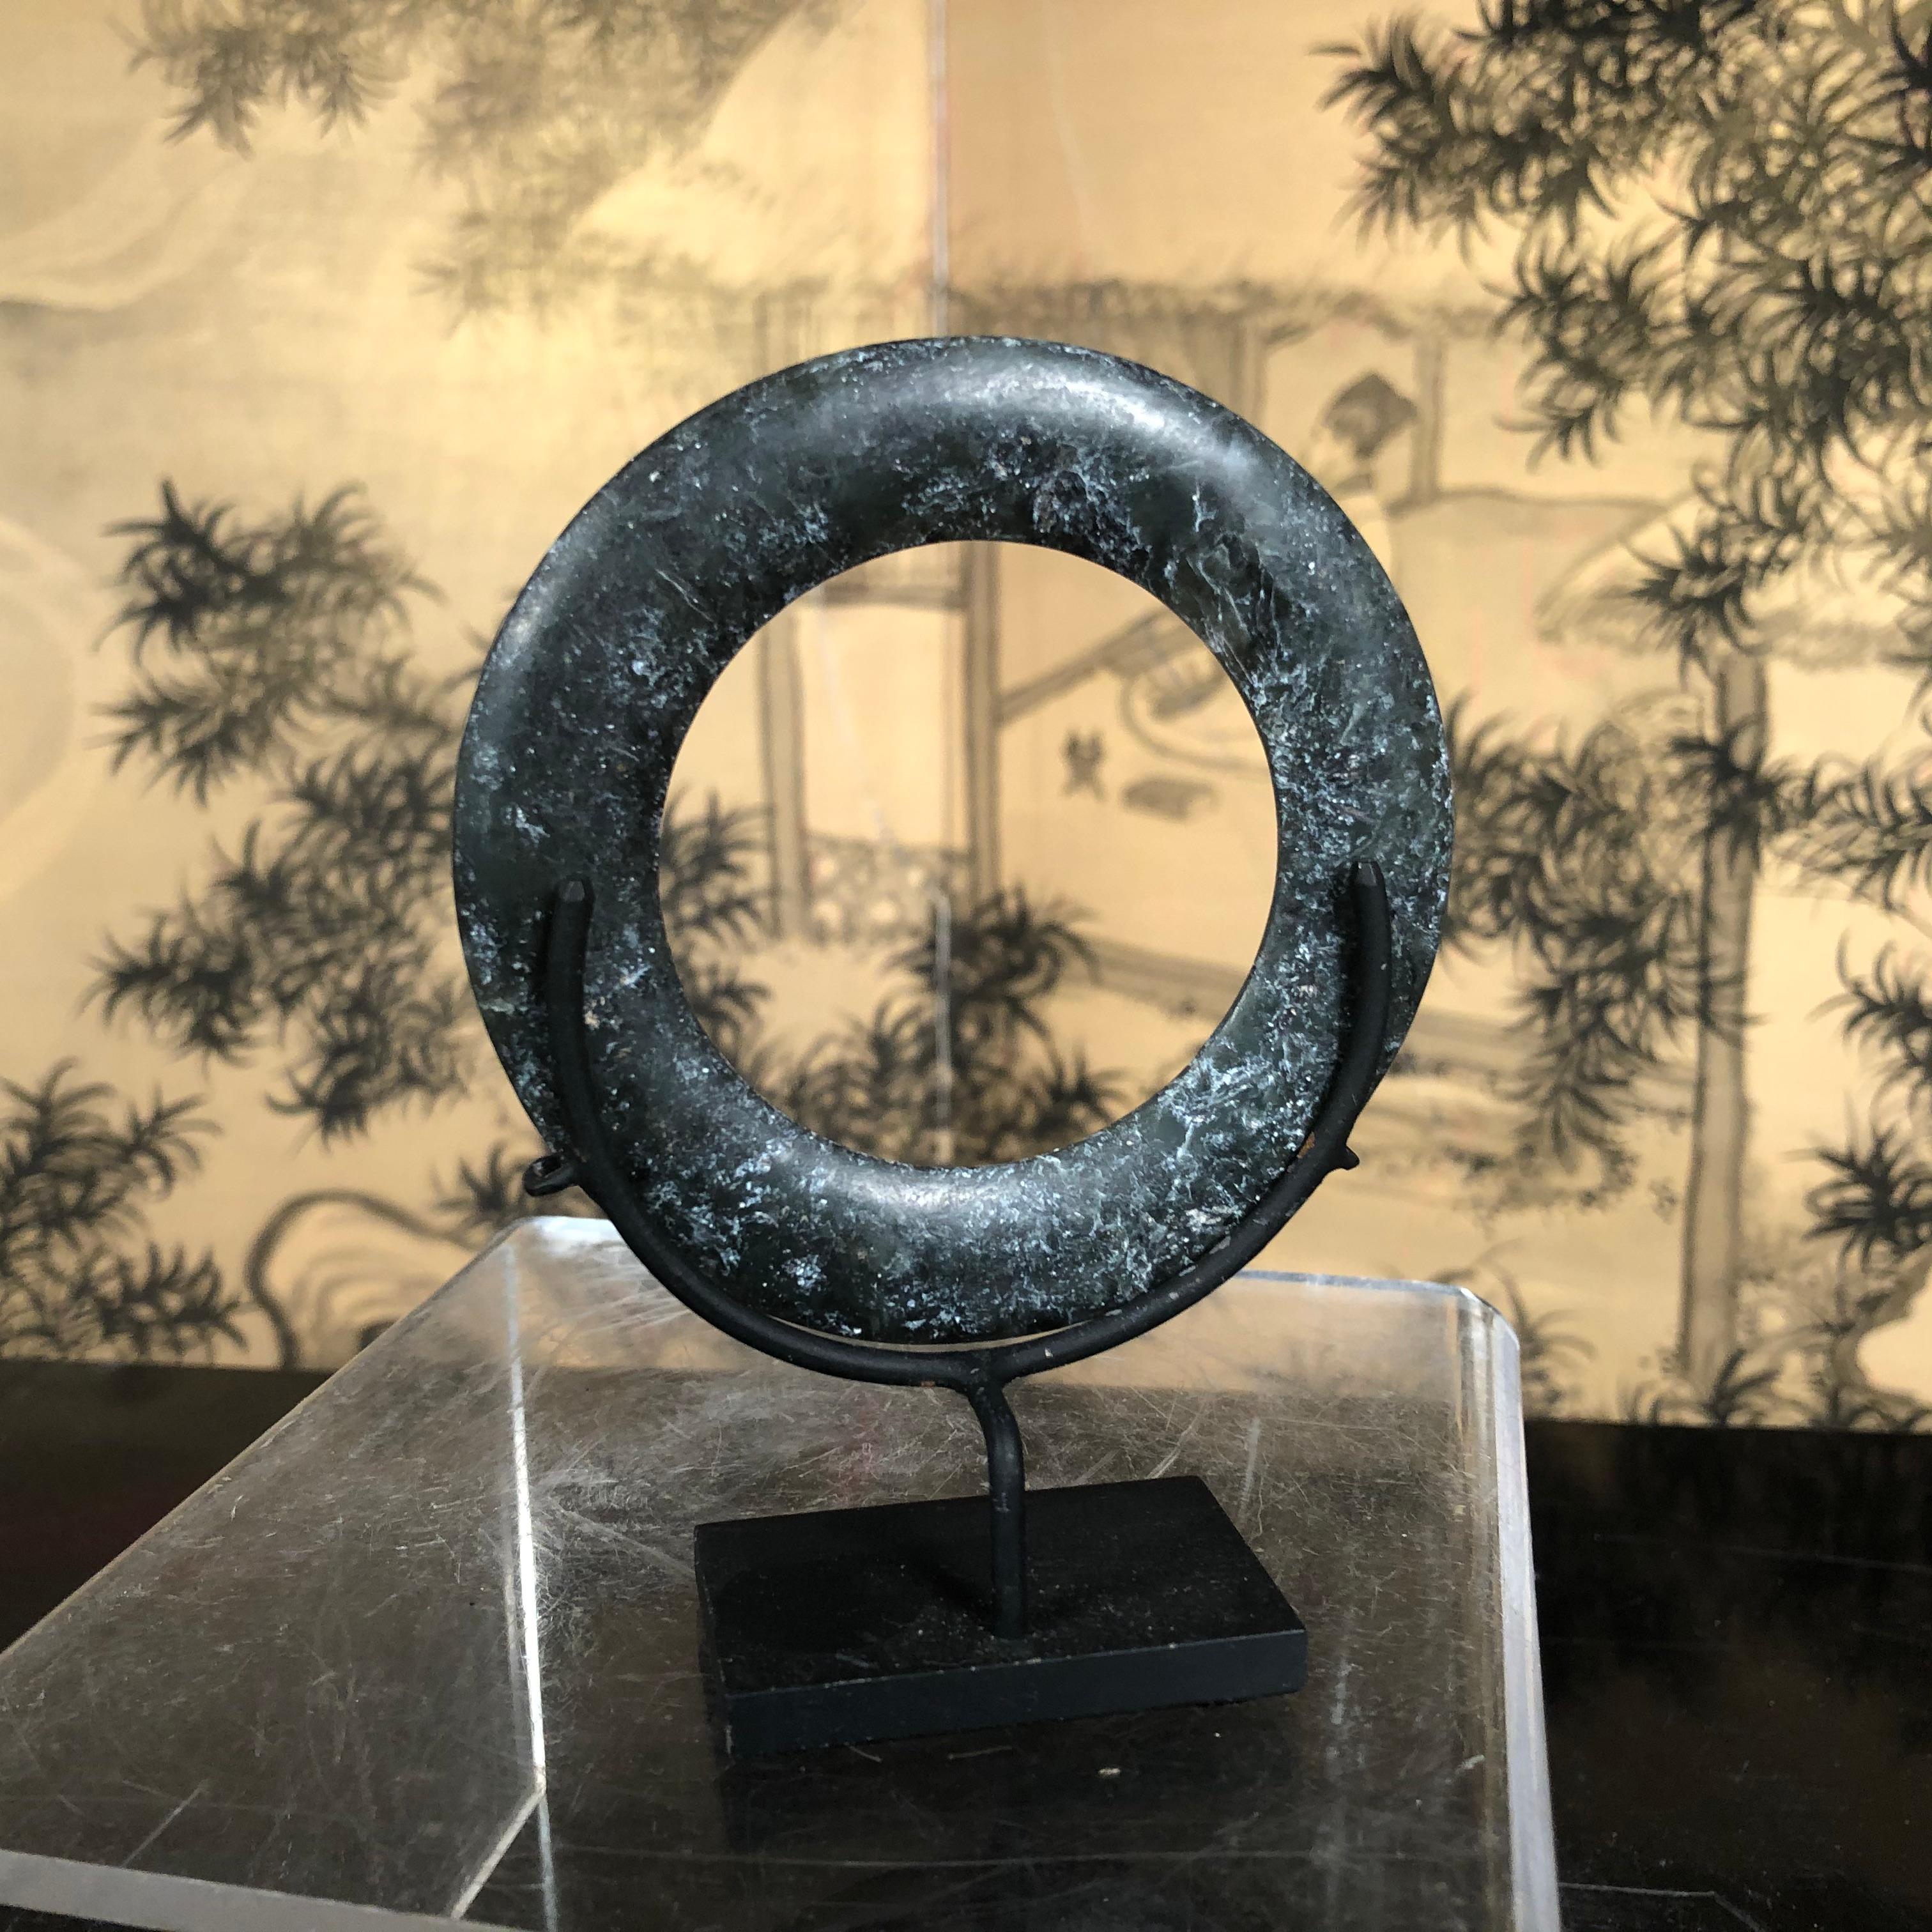 Hand-Carved Important Ancient Chinese Round Jade Ring Bi Disc, 2000 BCE